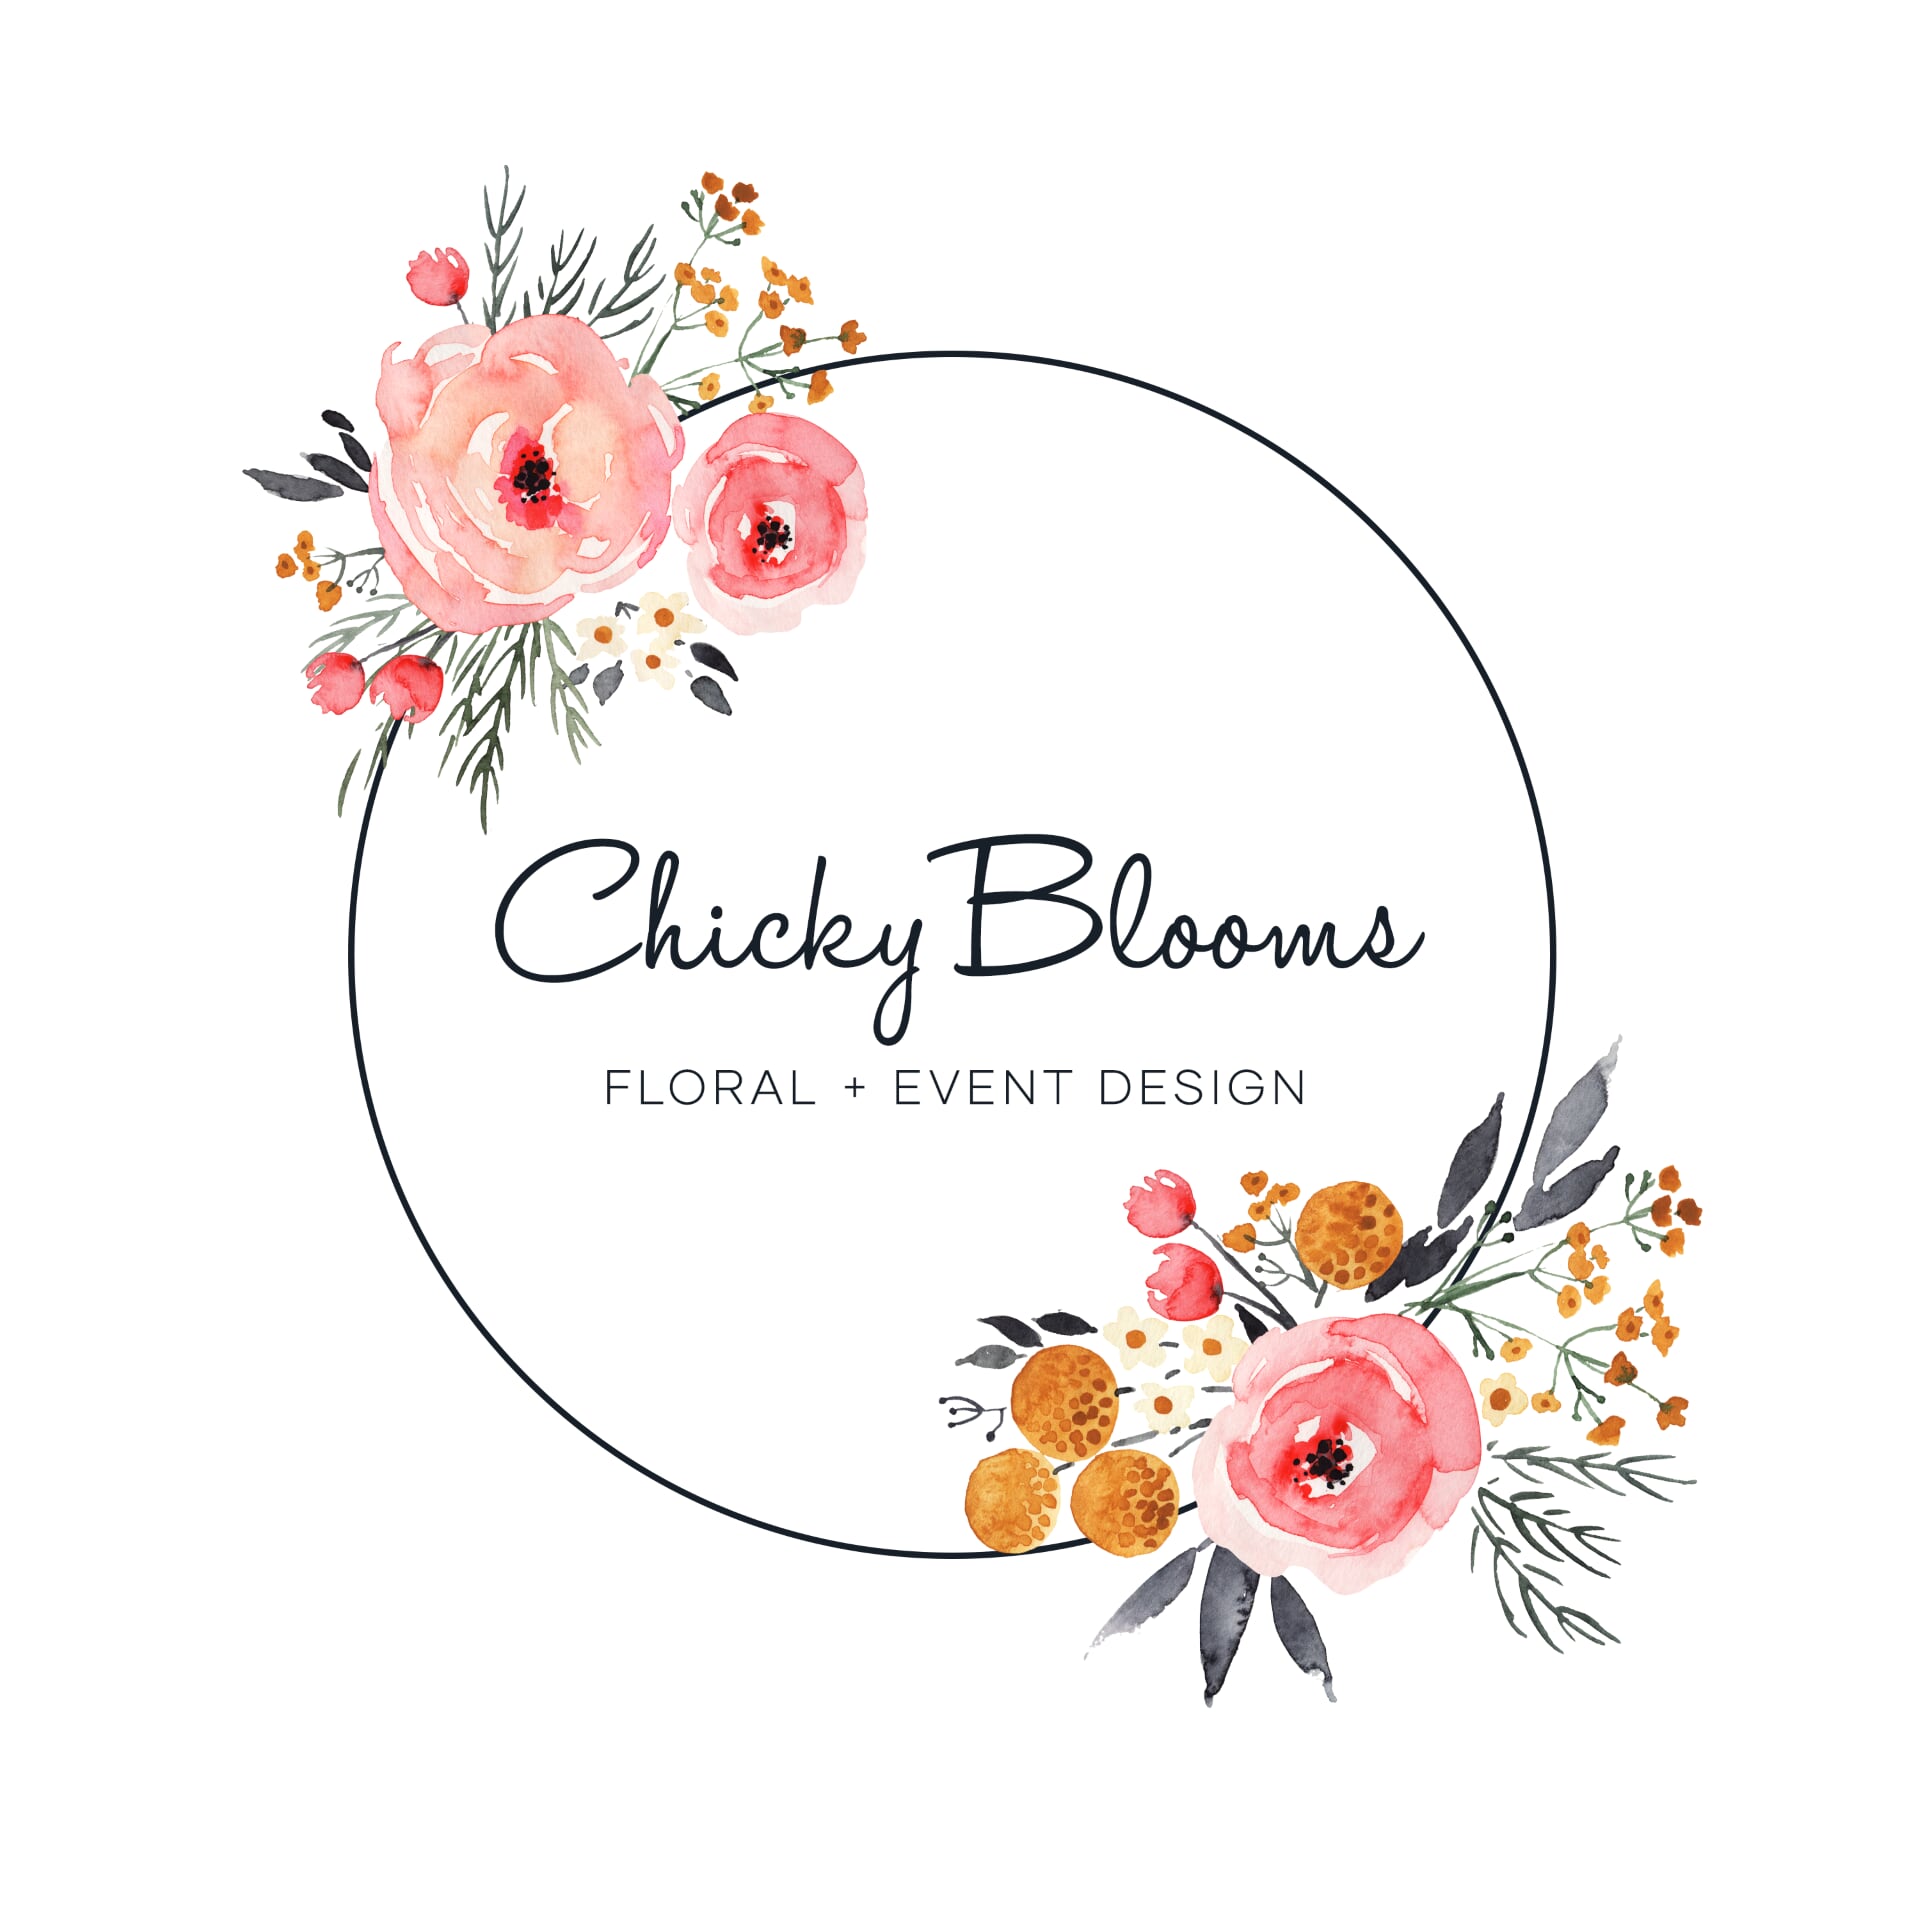 Chicky Blooms Flowers + Event Design